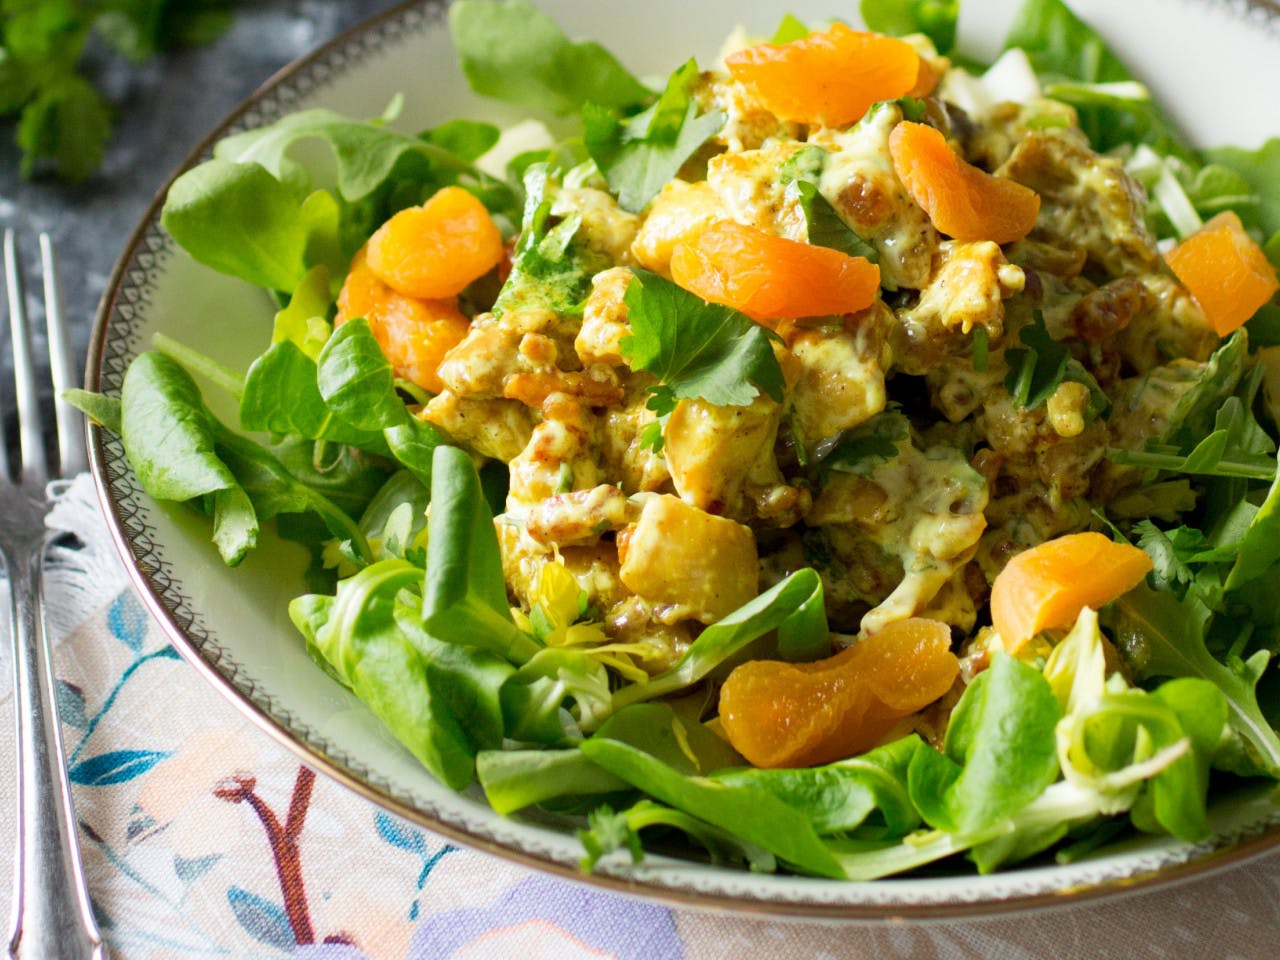 Classic chicken curry salad